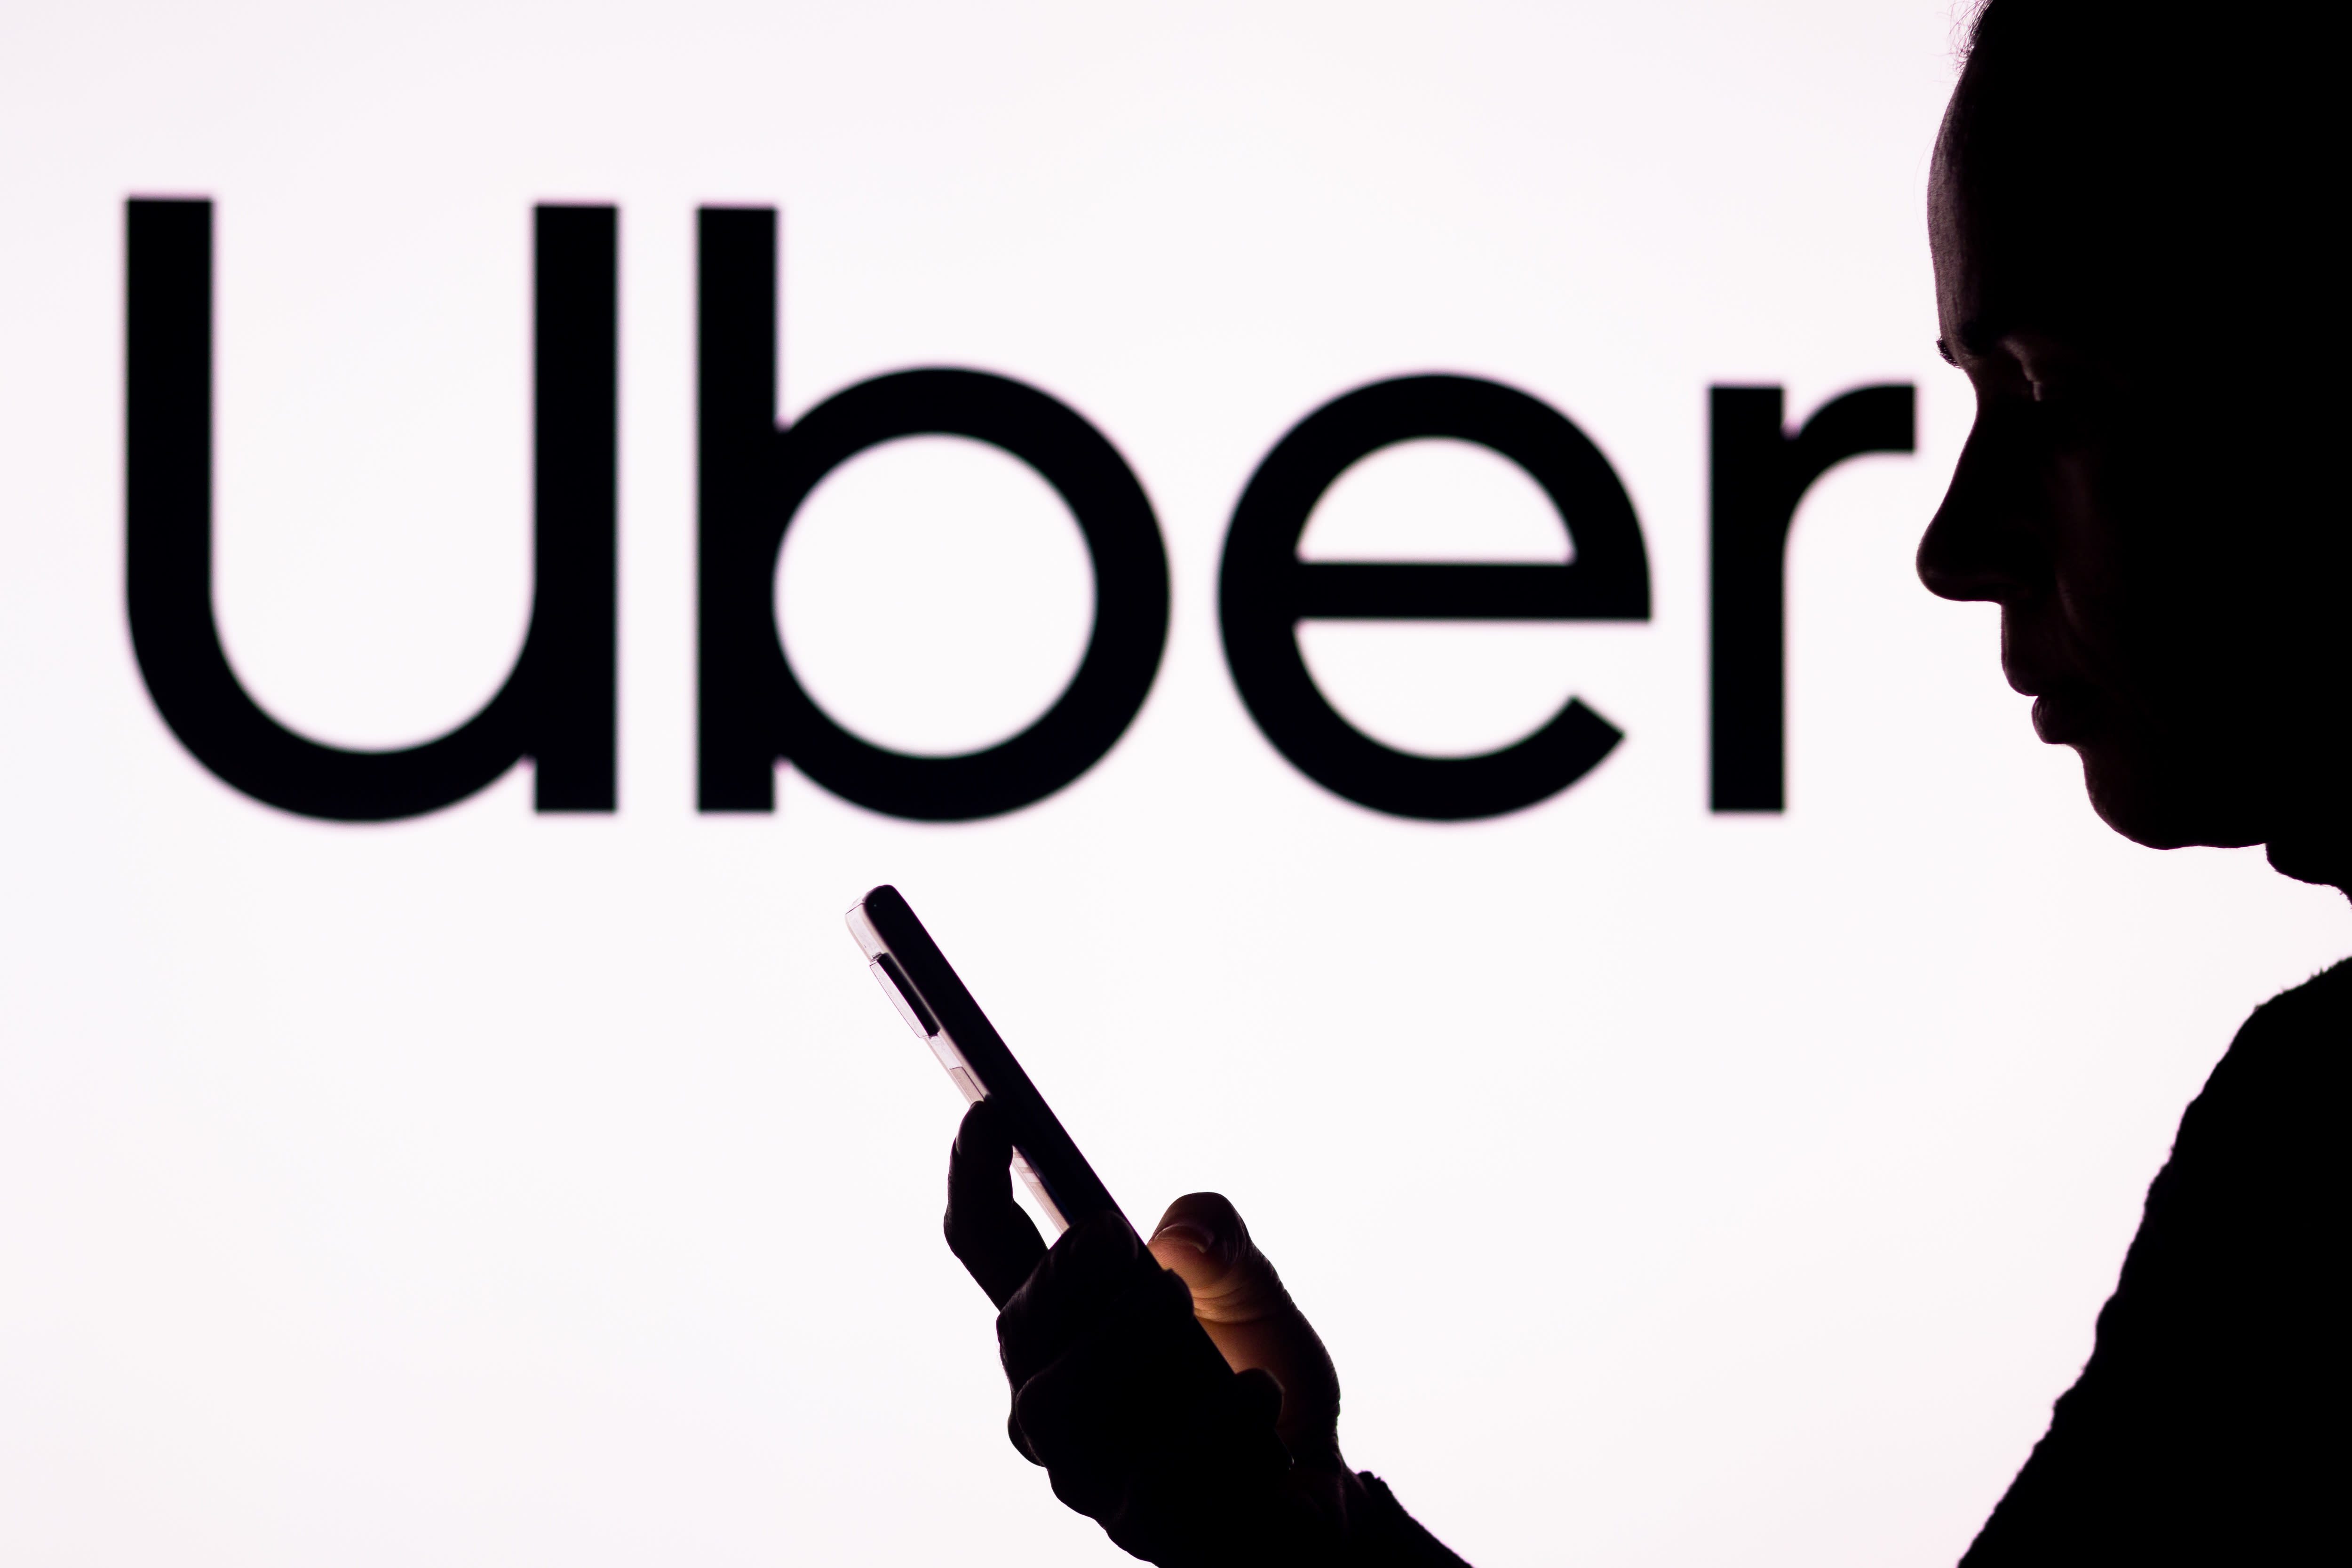 Uber is investigating the cyber security incident following reports of a hack